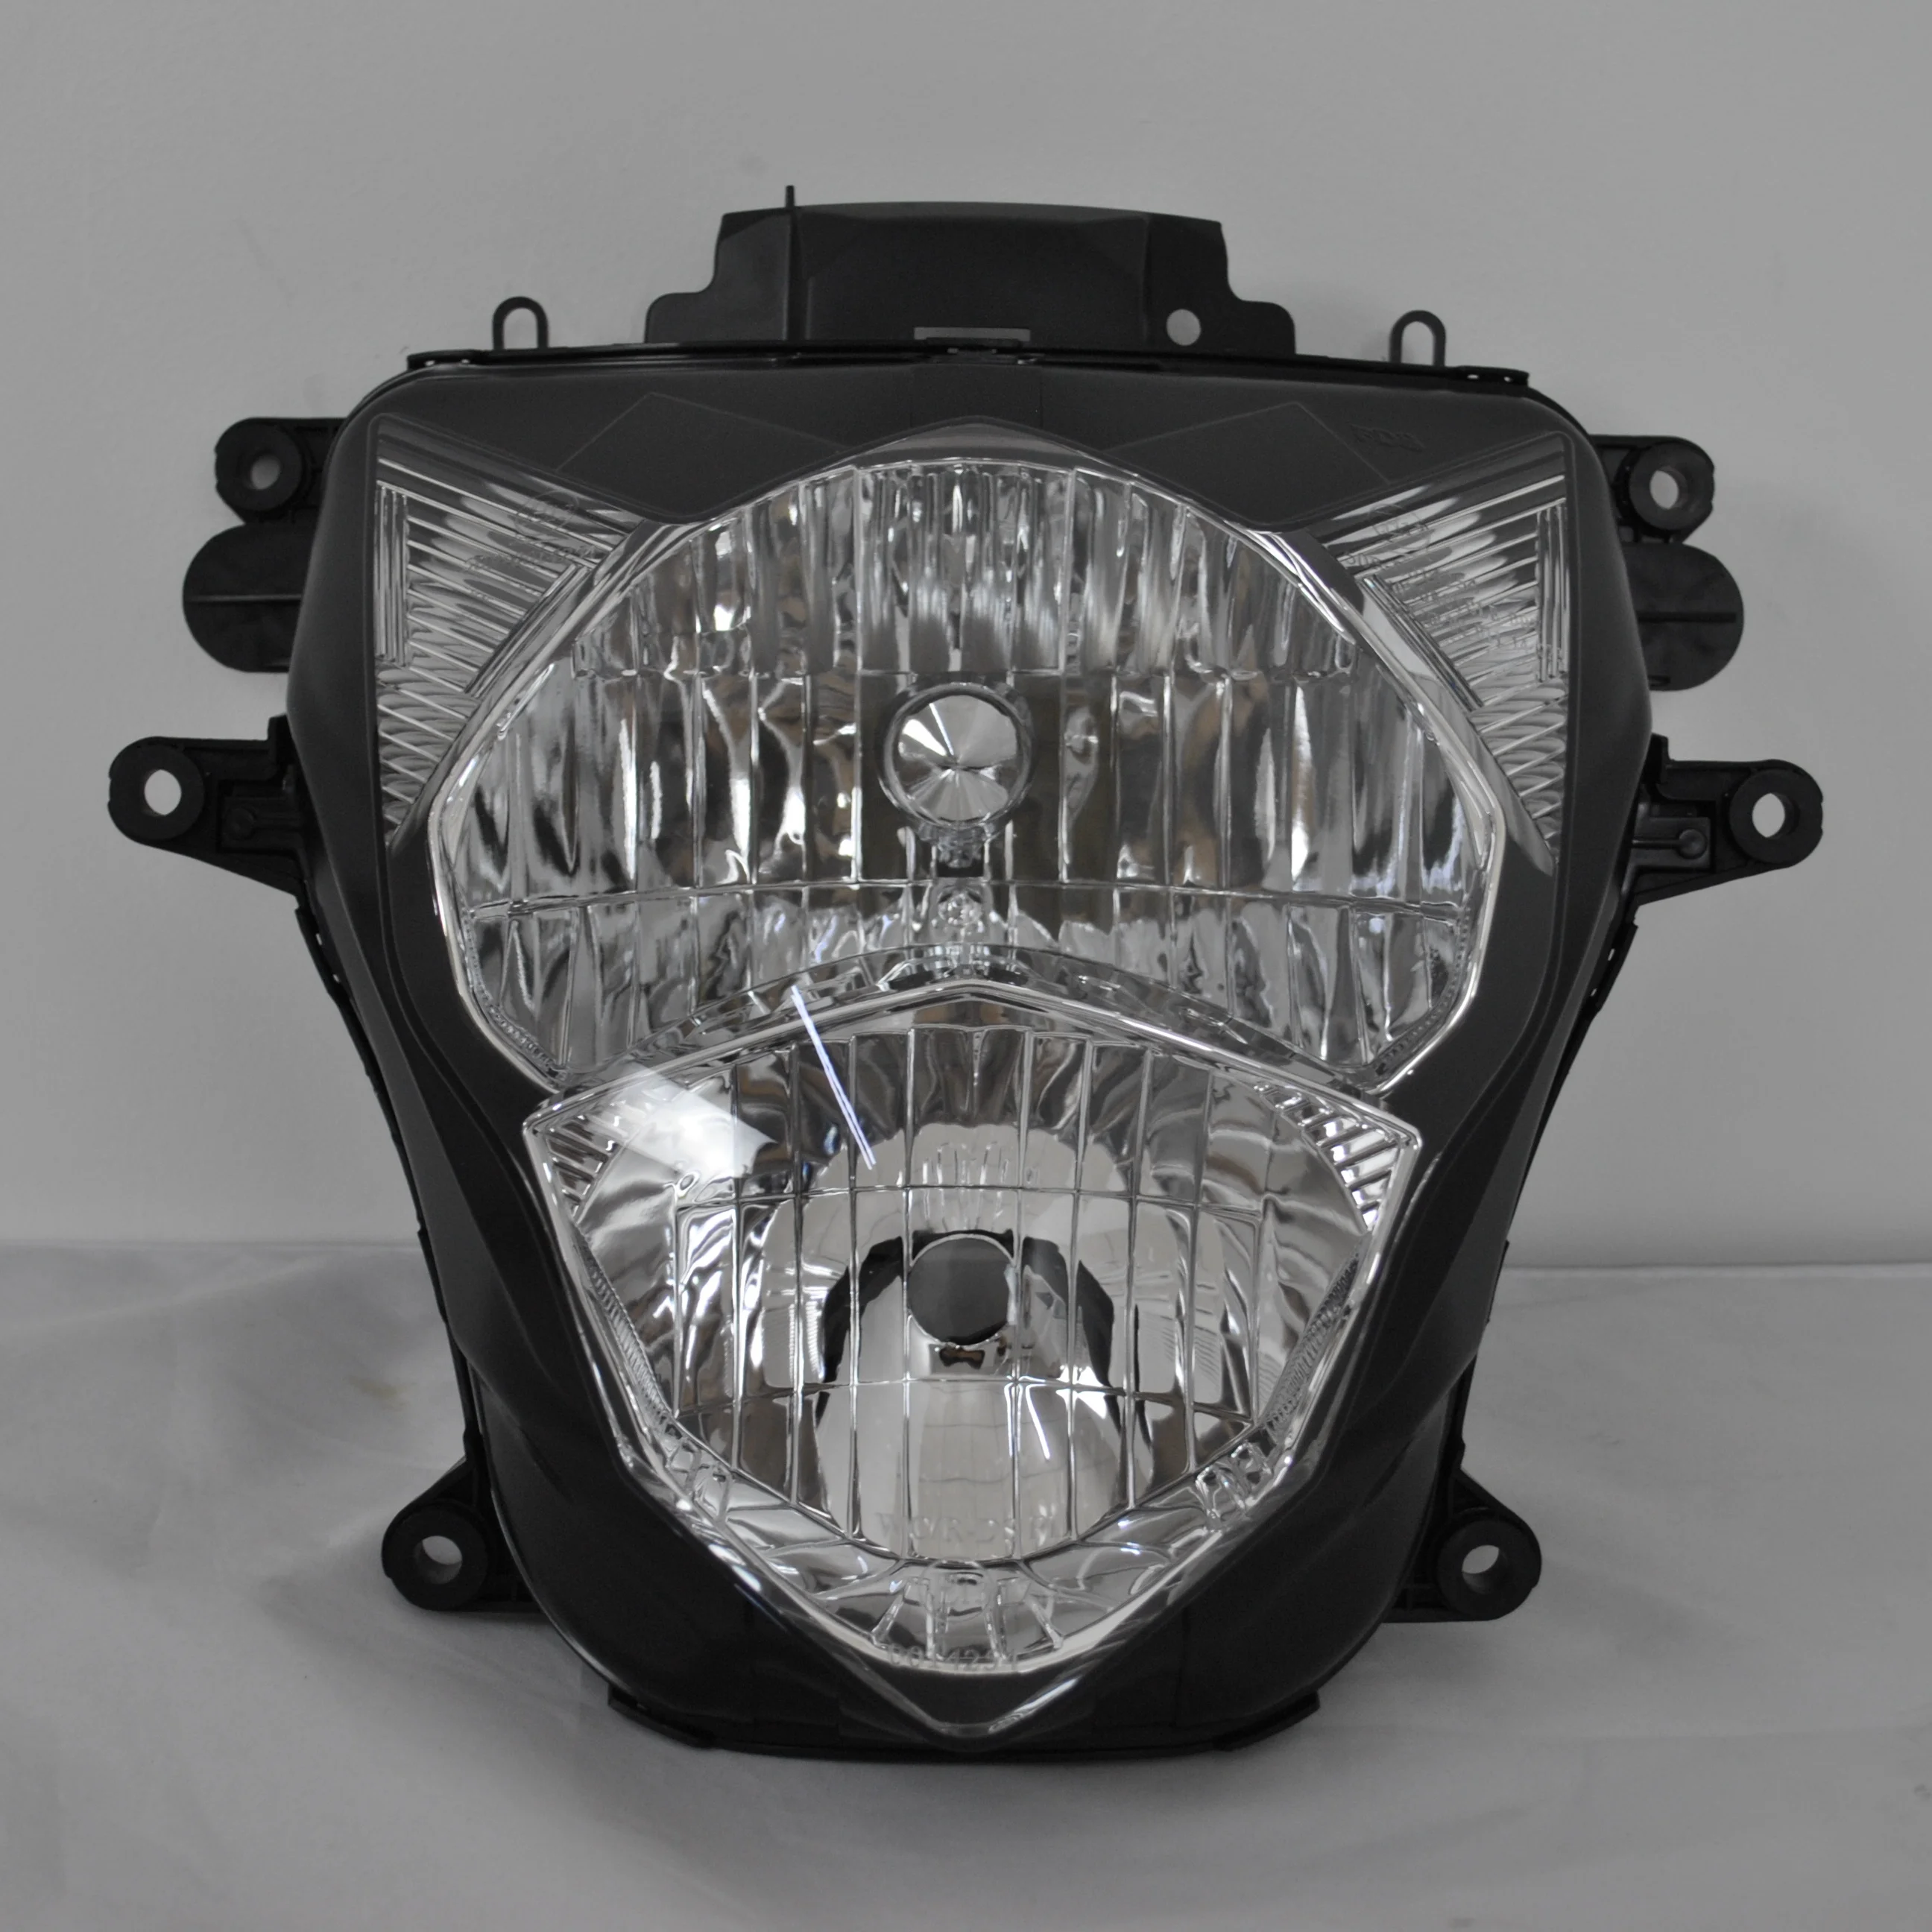 2021 WHSC Motorcycle Headlight	